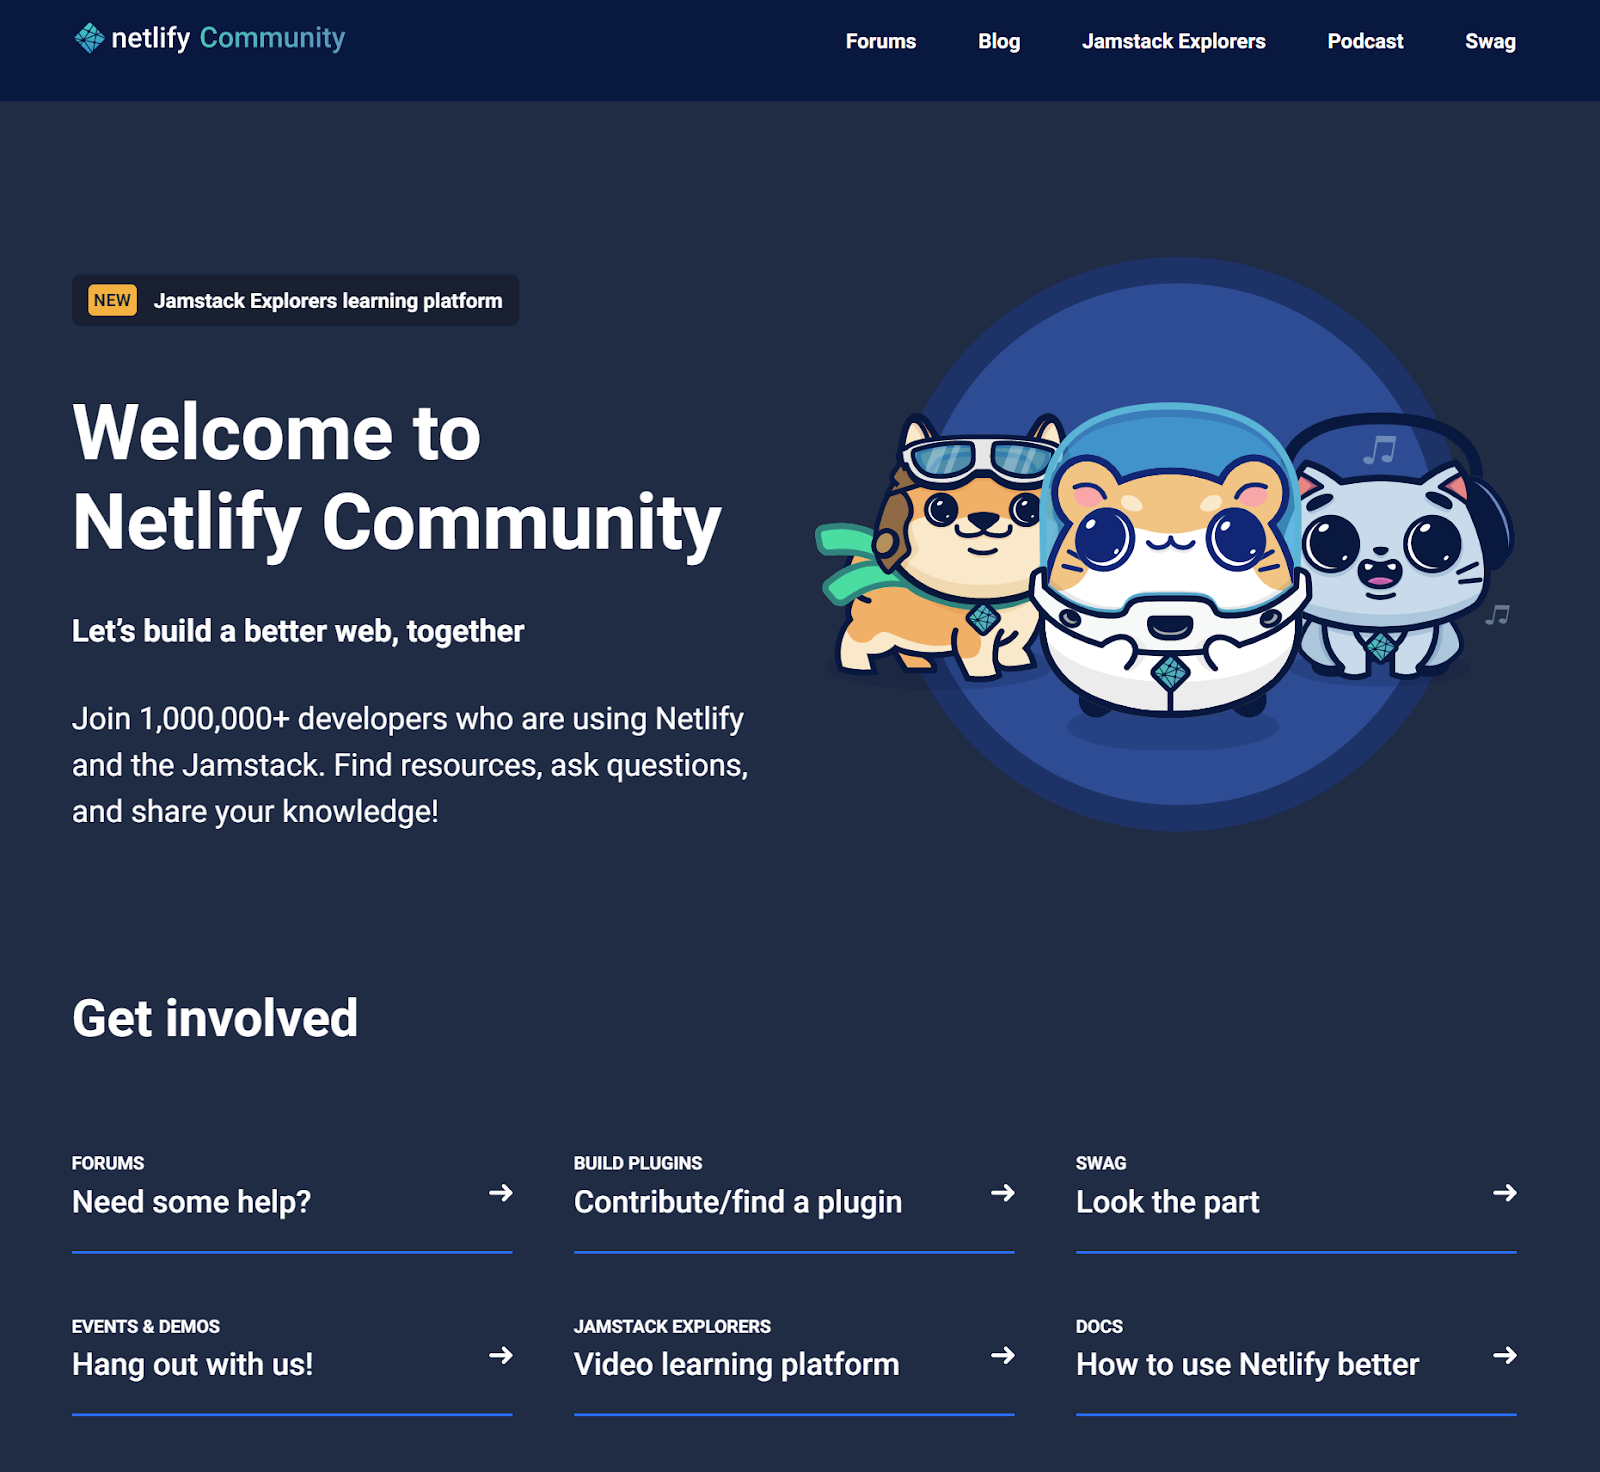 The community landing page. In the top corner, there is an animated dog in a pilot cap, an animated hamster in a spacesuit, and an animated cat in headphones. All three are smiling. In the bottom third of the image there are six links to get involved. From left to right: Forums, build plugins, swag, events and demos, jamstack explorers, and docs.